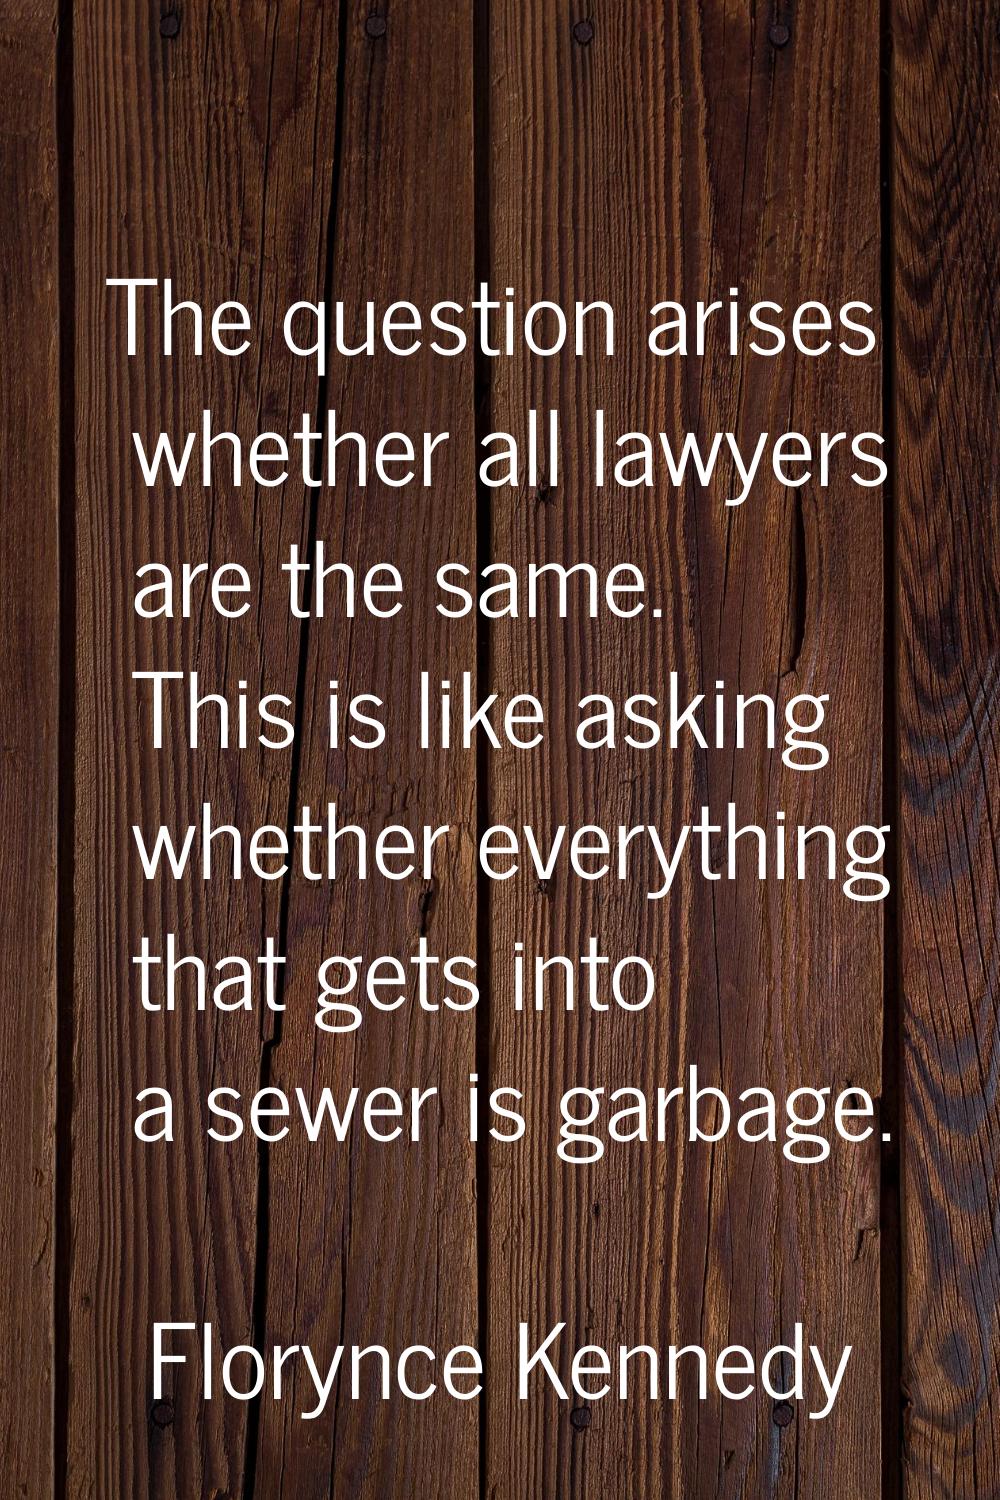 The question arises whether all lawyers are the same. This is like asking whether everything that g